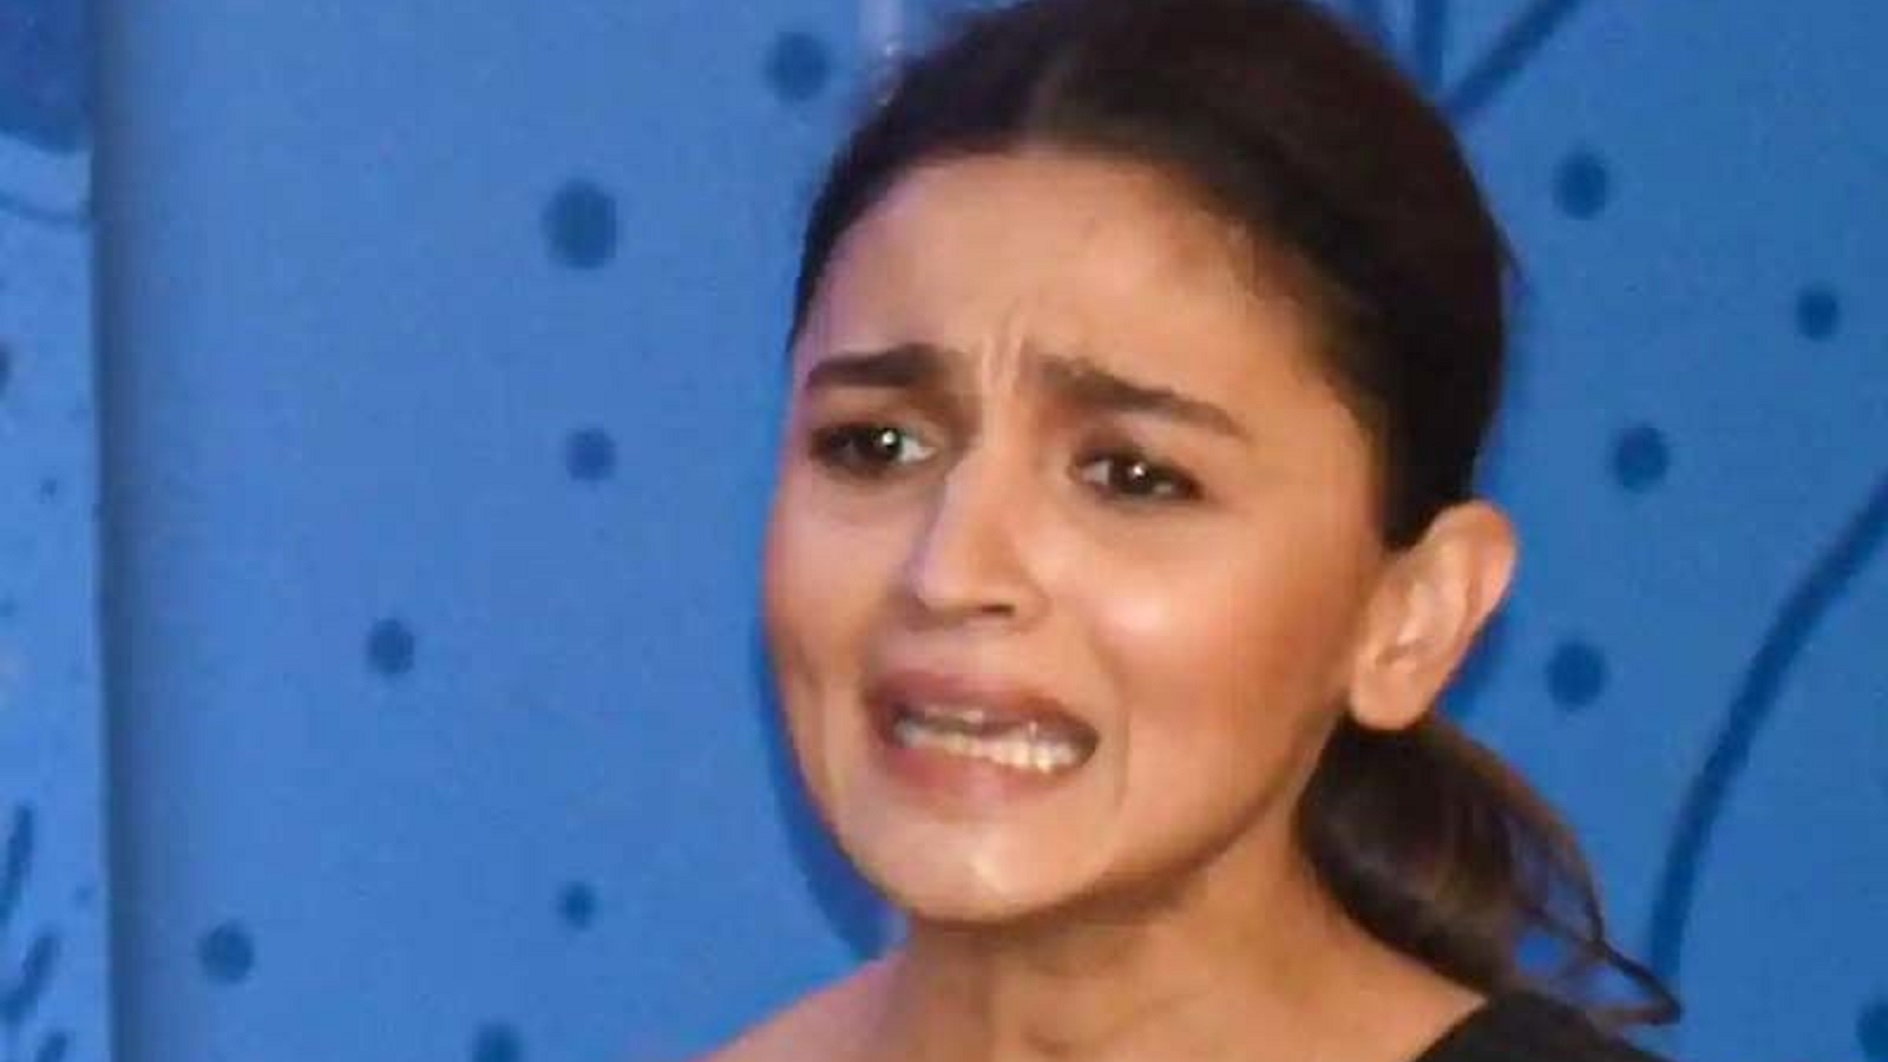 Alia Bhatt Says ‘If You Don’t Like Me, Don’t Watch Me’, Gets Brutally Trolled Online